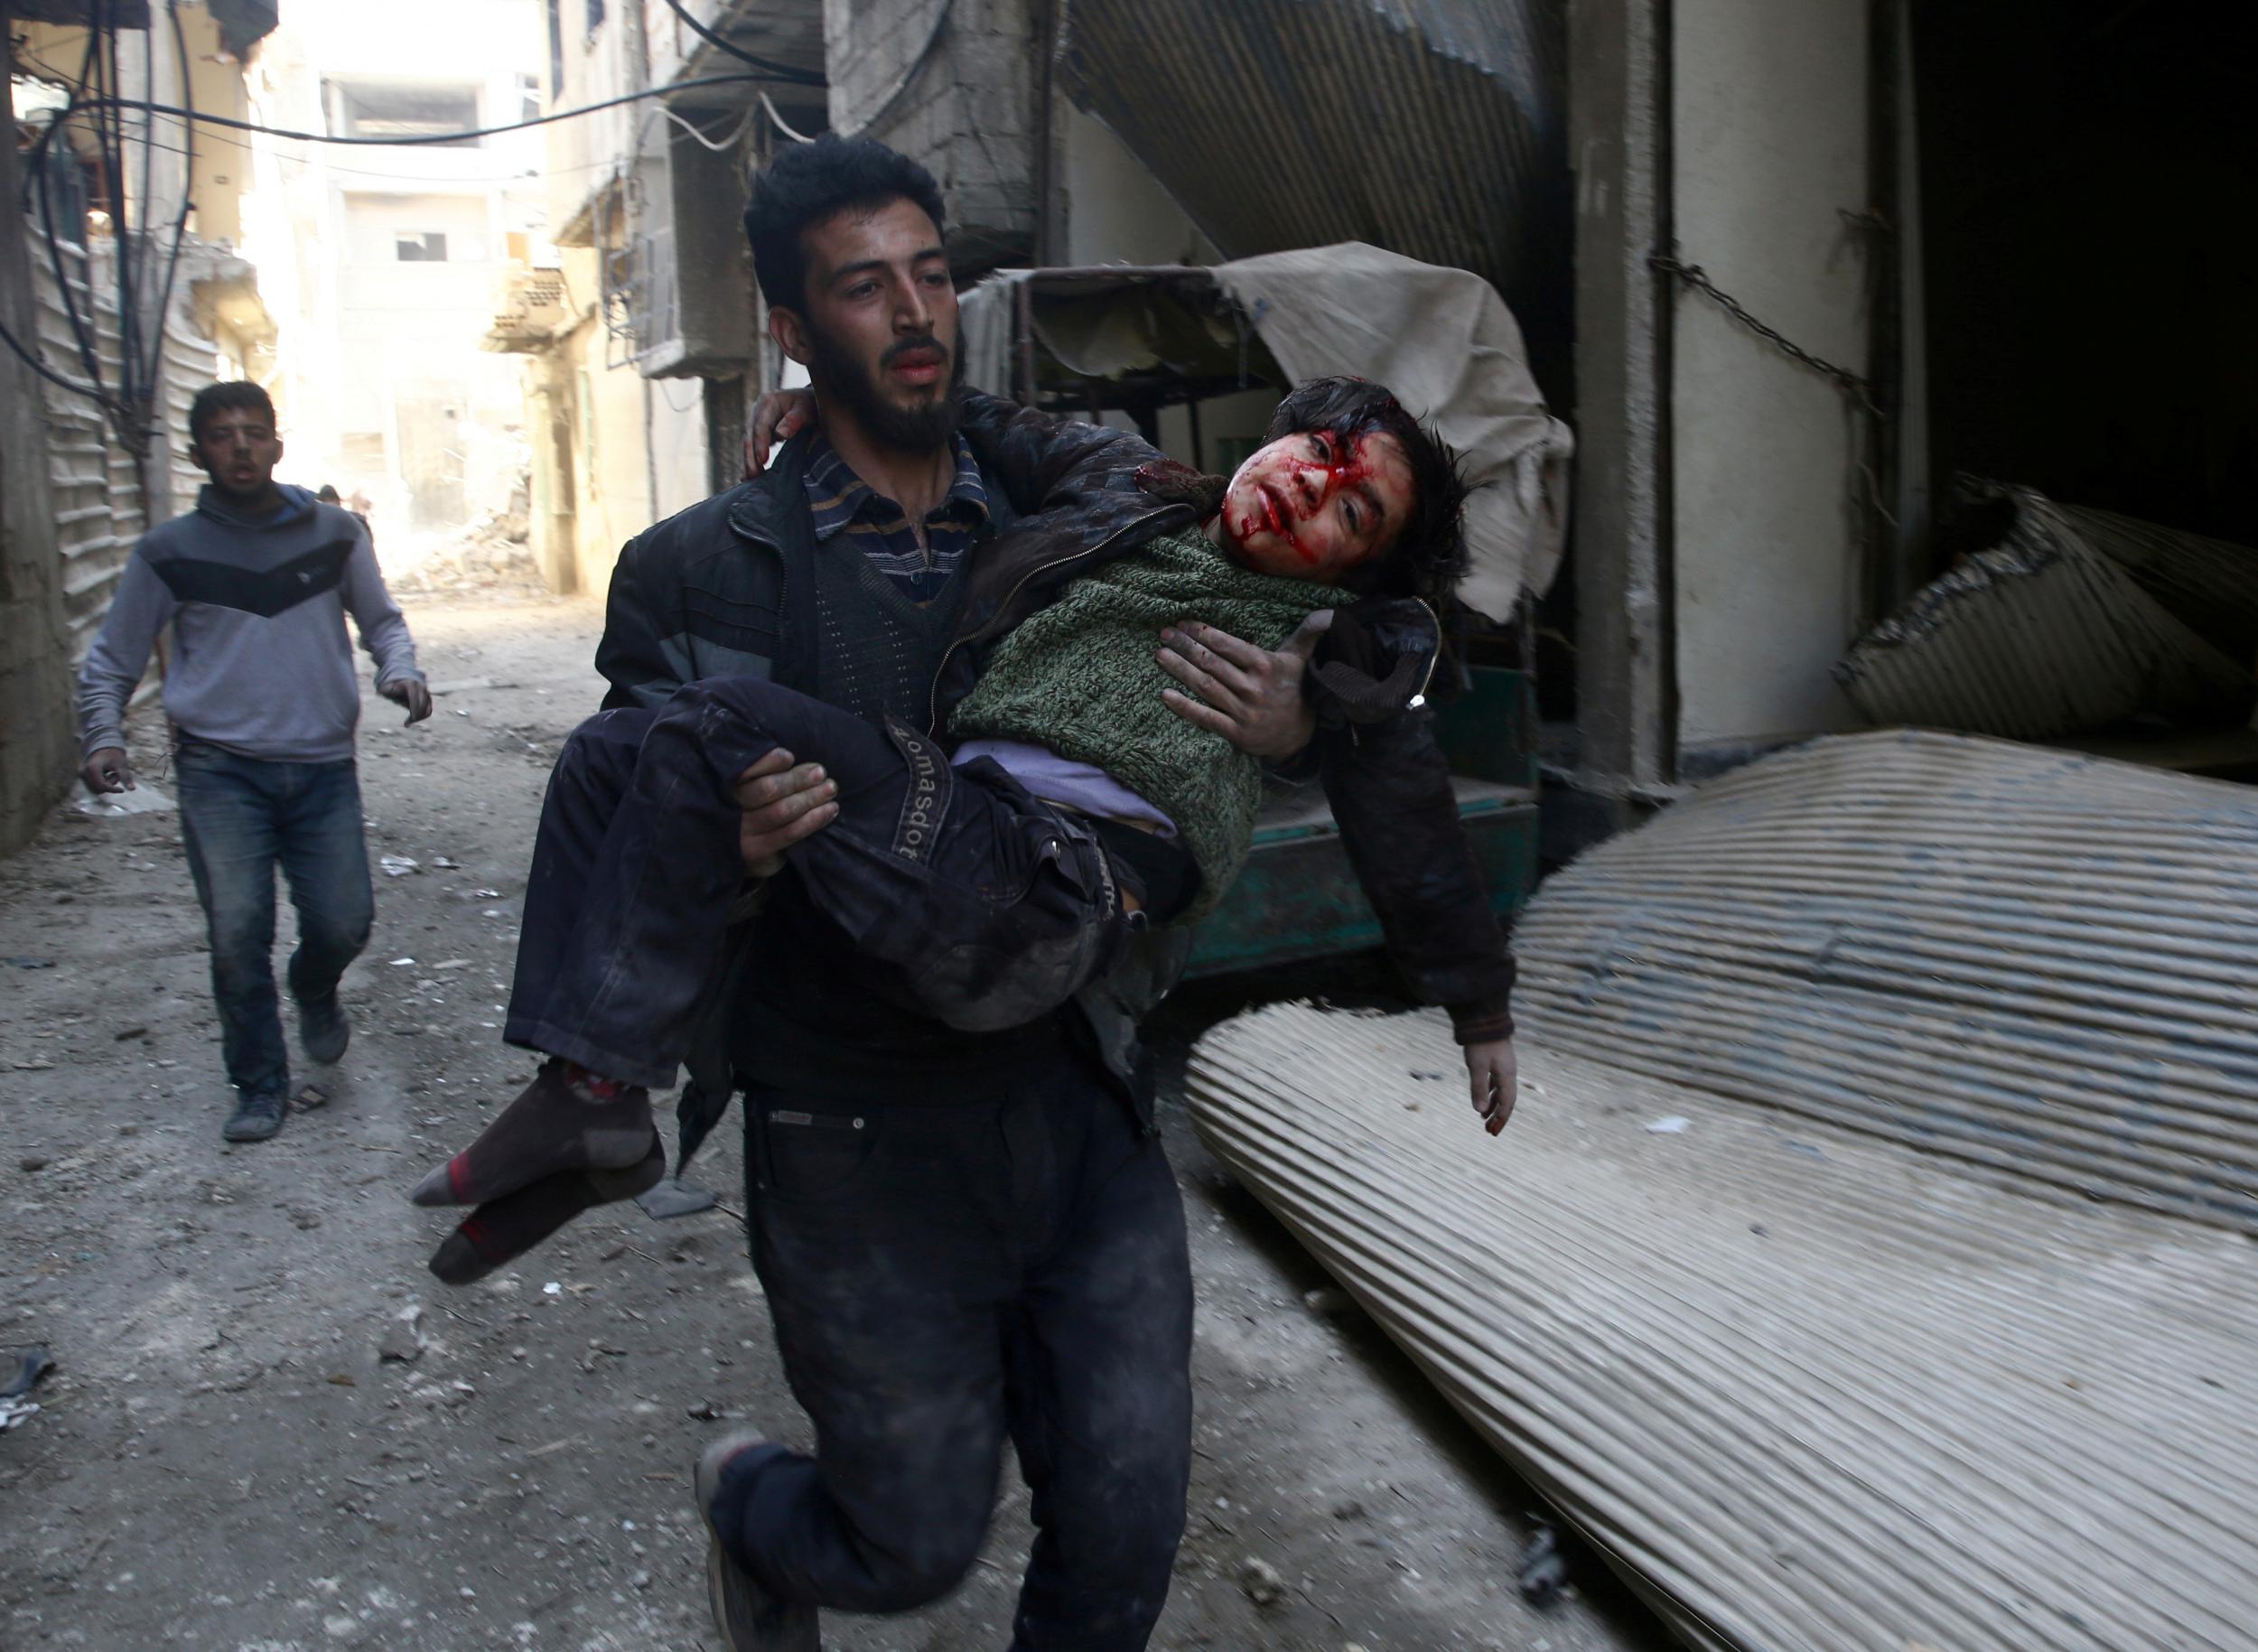 Mohammed Abu Anas runs with an injured boy in the besieged eastern Ghouta town of Hamouriyeh near Damascus, Syria, on 21 February 2018